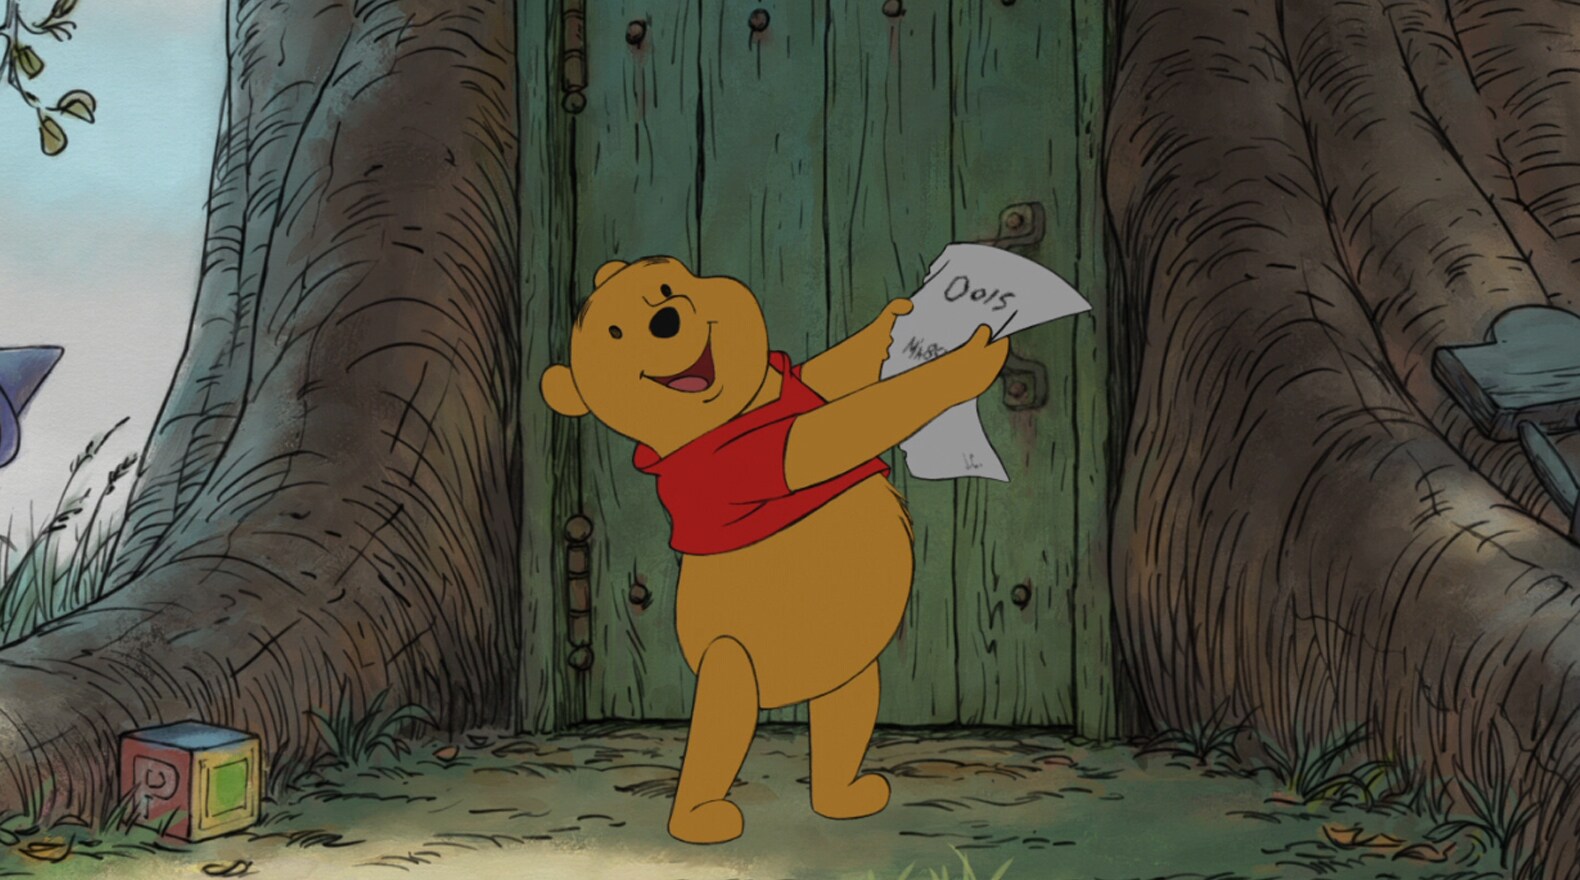 Pooh found a note from Christopher Robin!